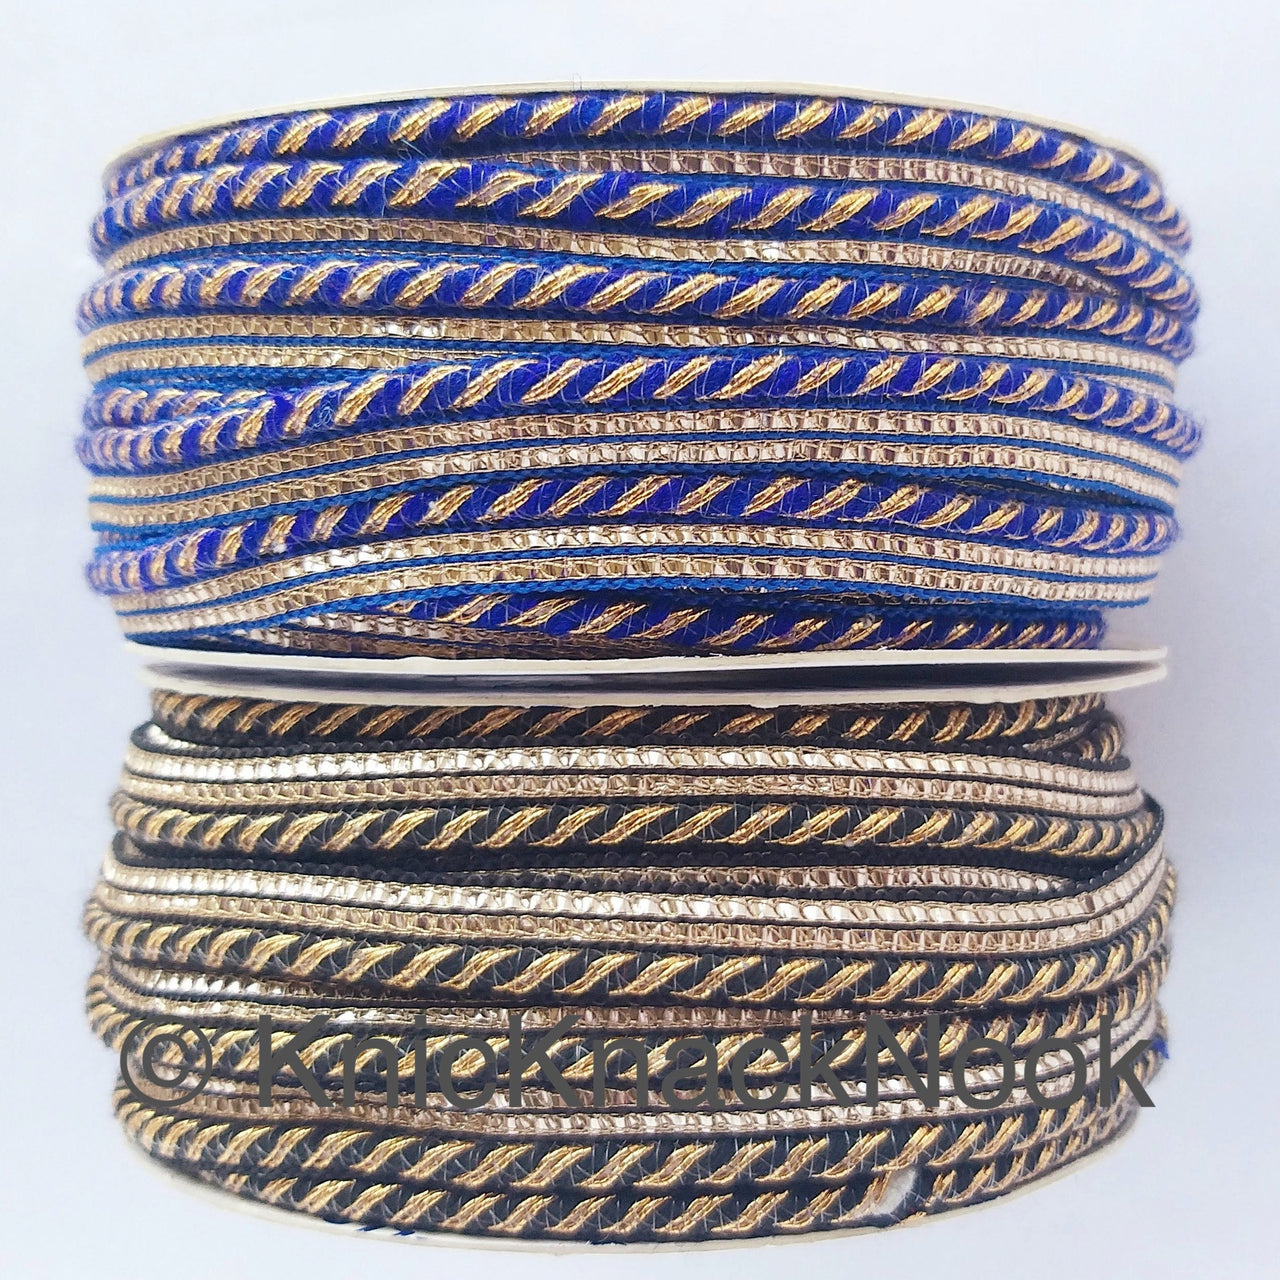 Wholesale Royal Blue / Black And Gold Stripes Piping Cord trim With Glitter Gold Piping, Approx. 10 mm wide, 9 Yards Trim